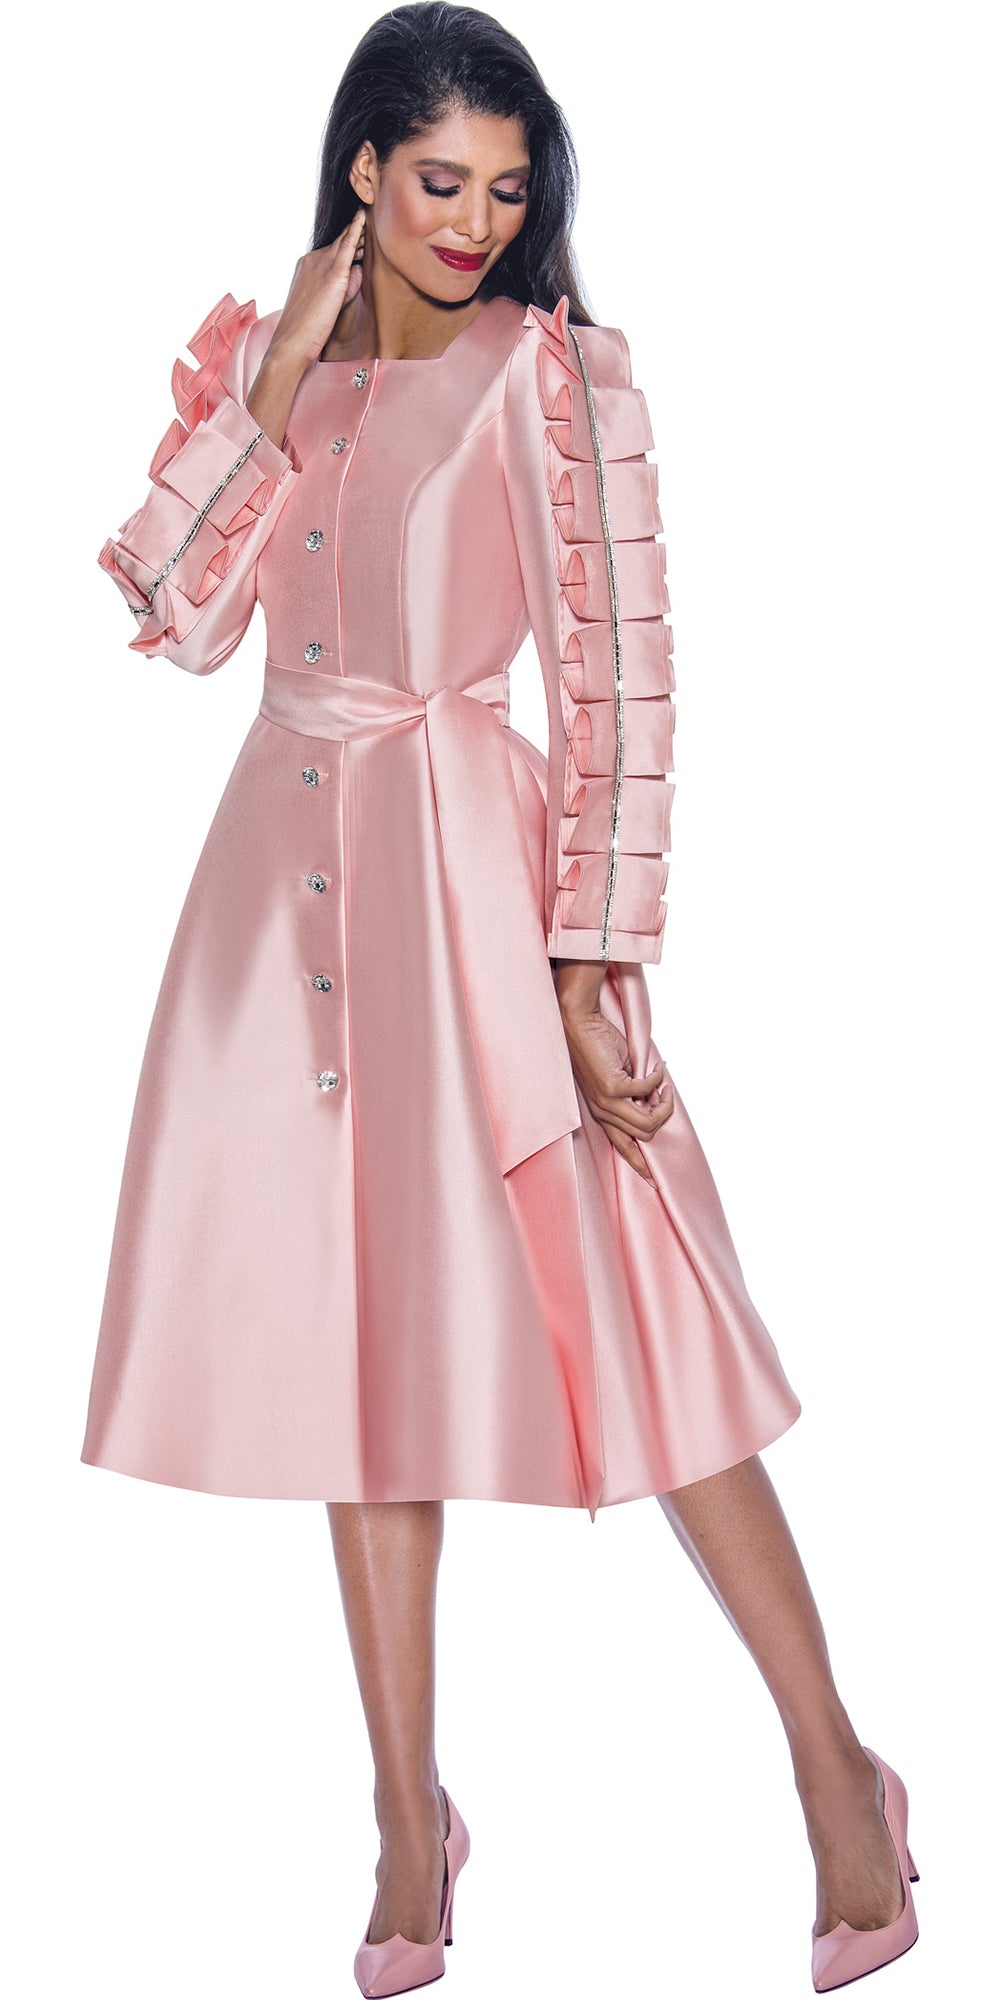 Dresses by Nubiano 12381 - Pink - Button front Silky Twill Dress with Embellishments